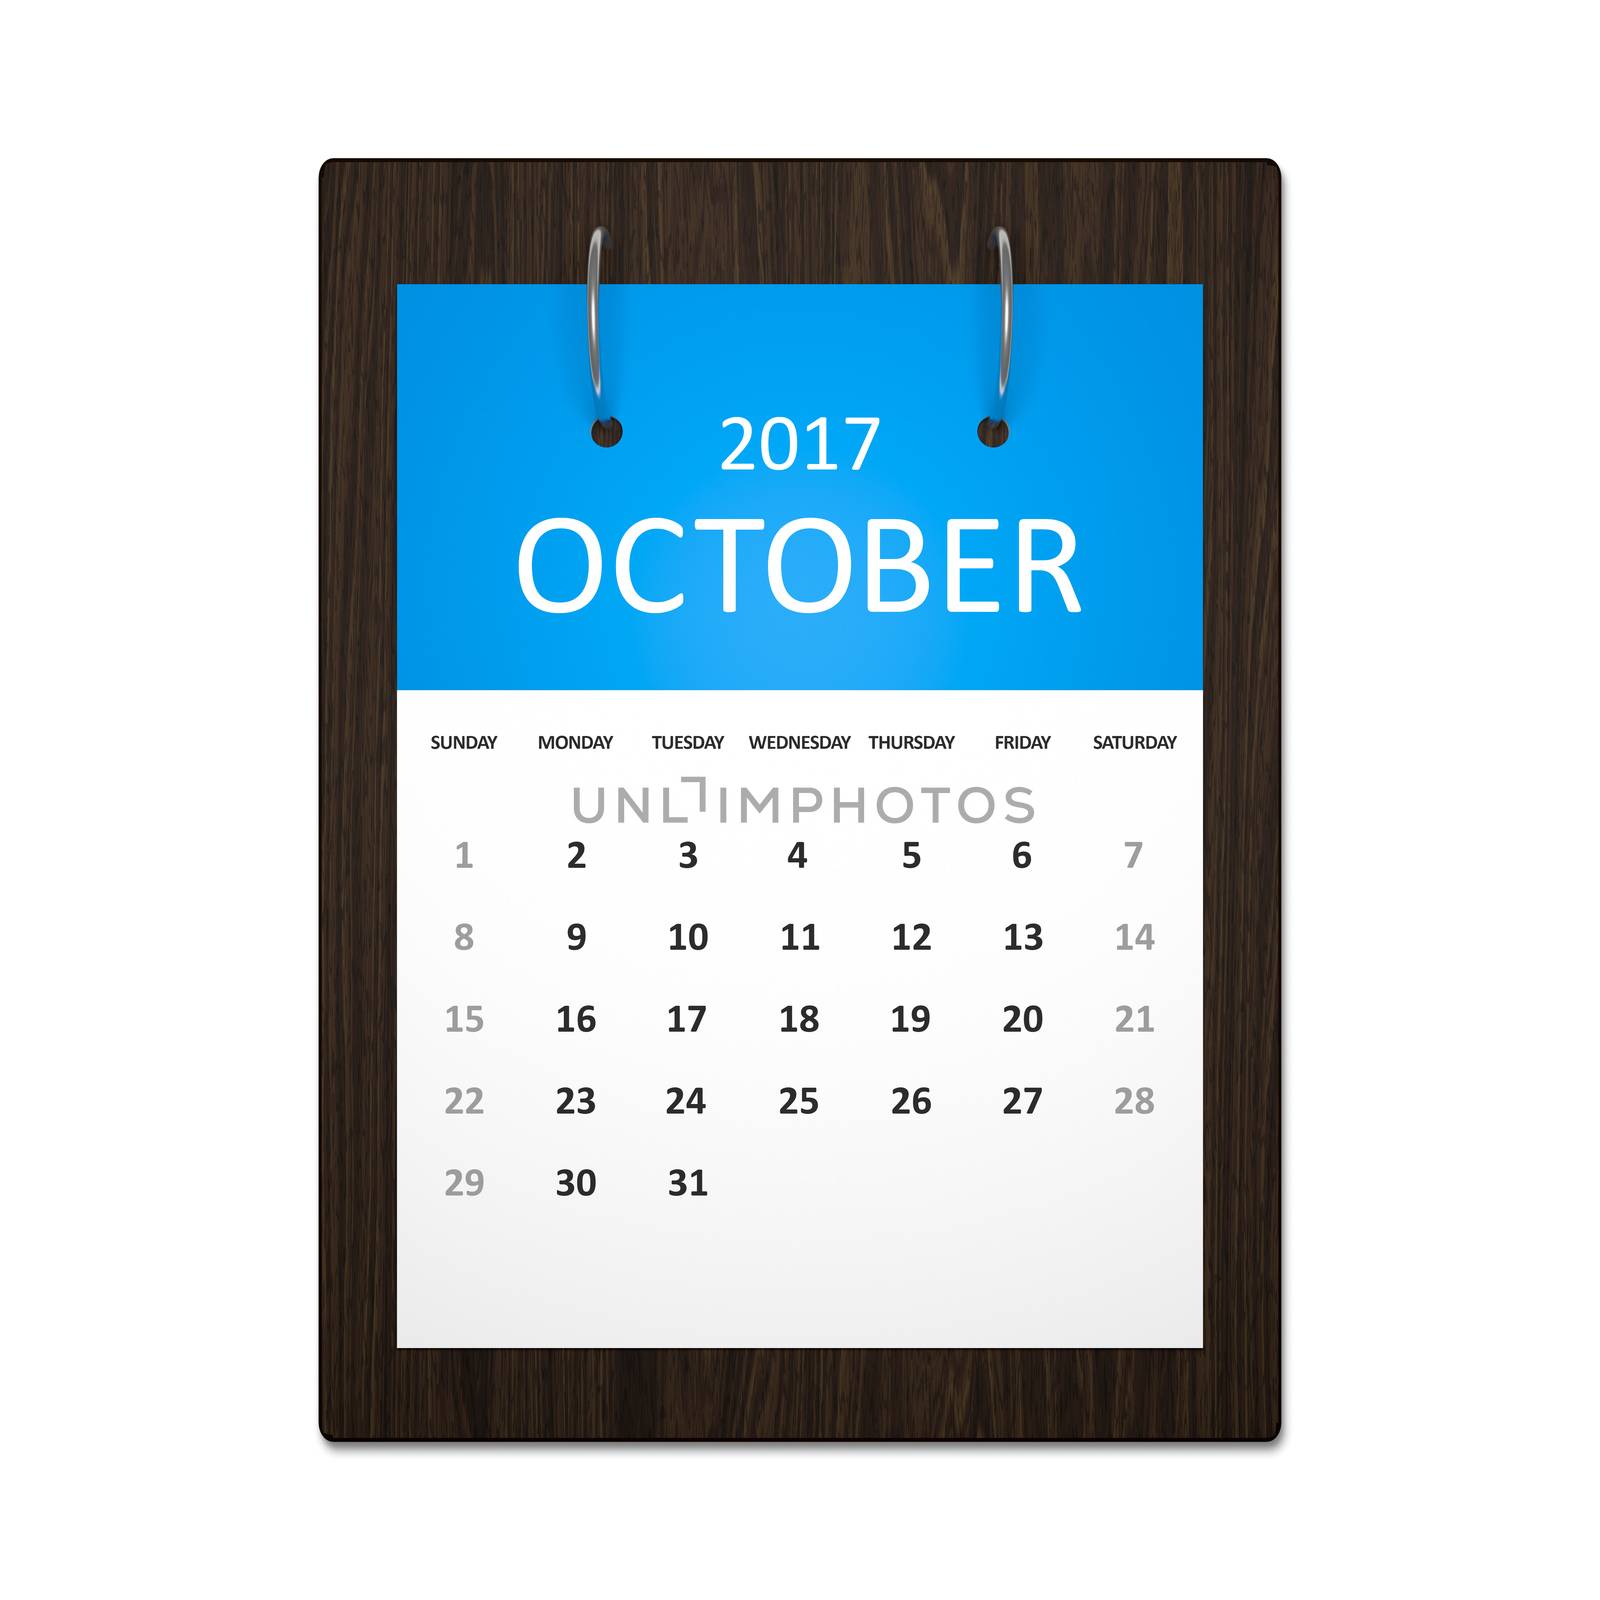 An image of a stylish calendar for event planning 2017 october